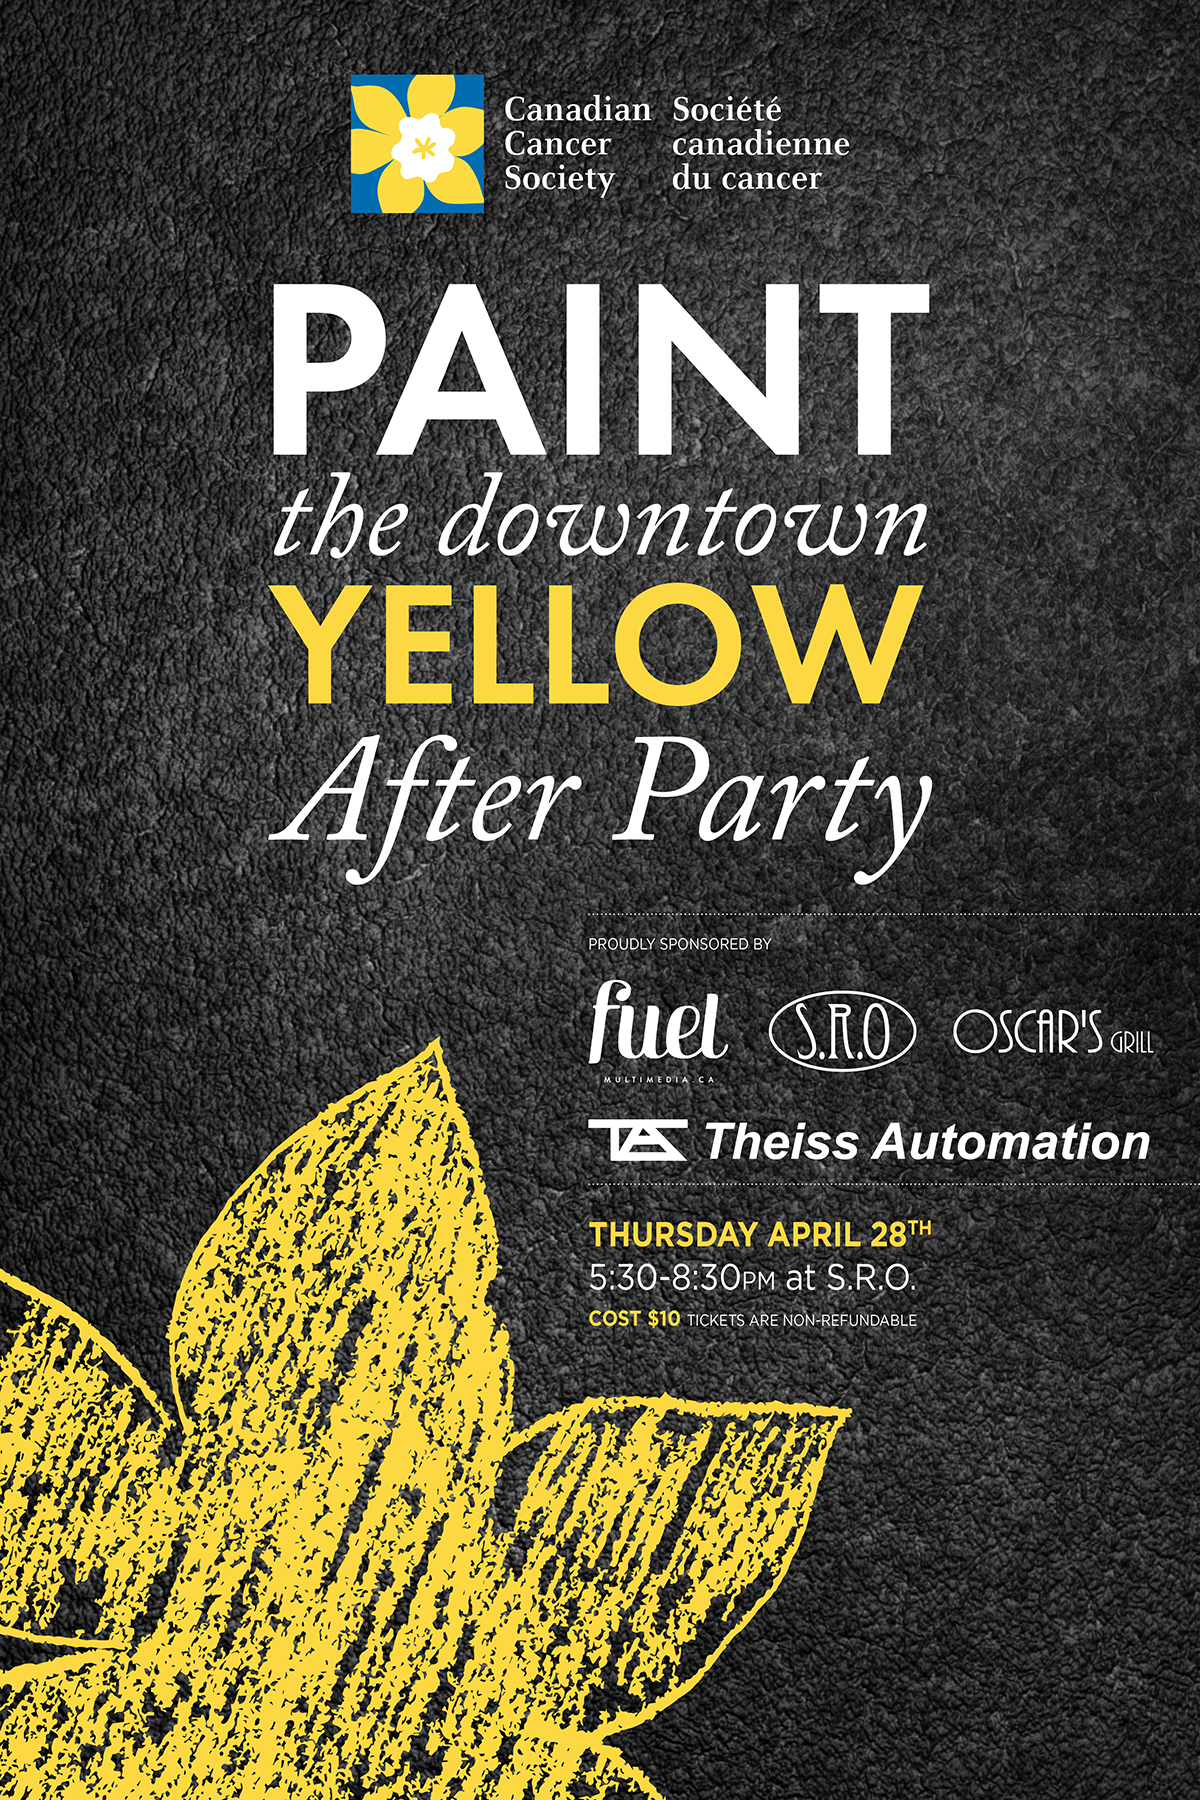 Paint the Downtown Yellow after party this Thursday!